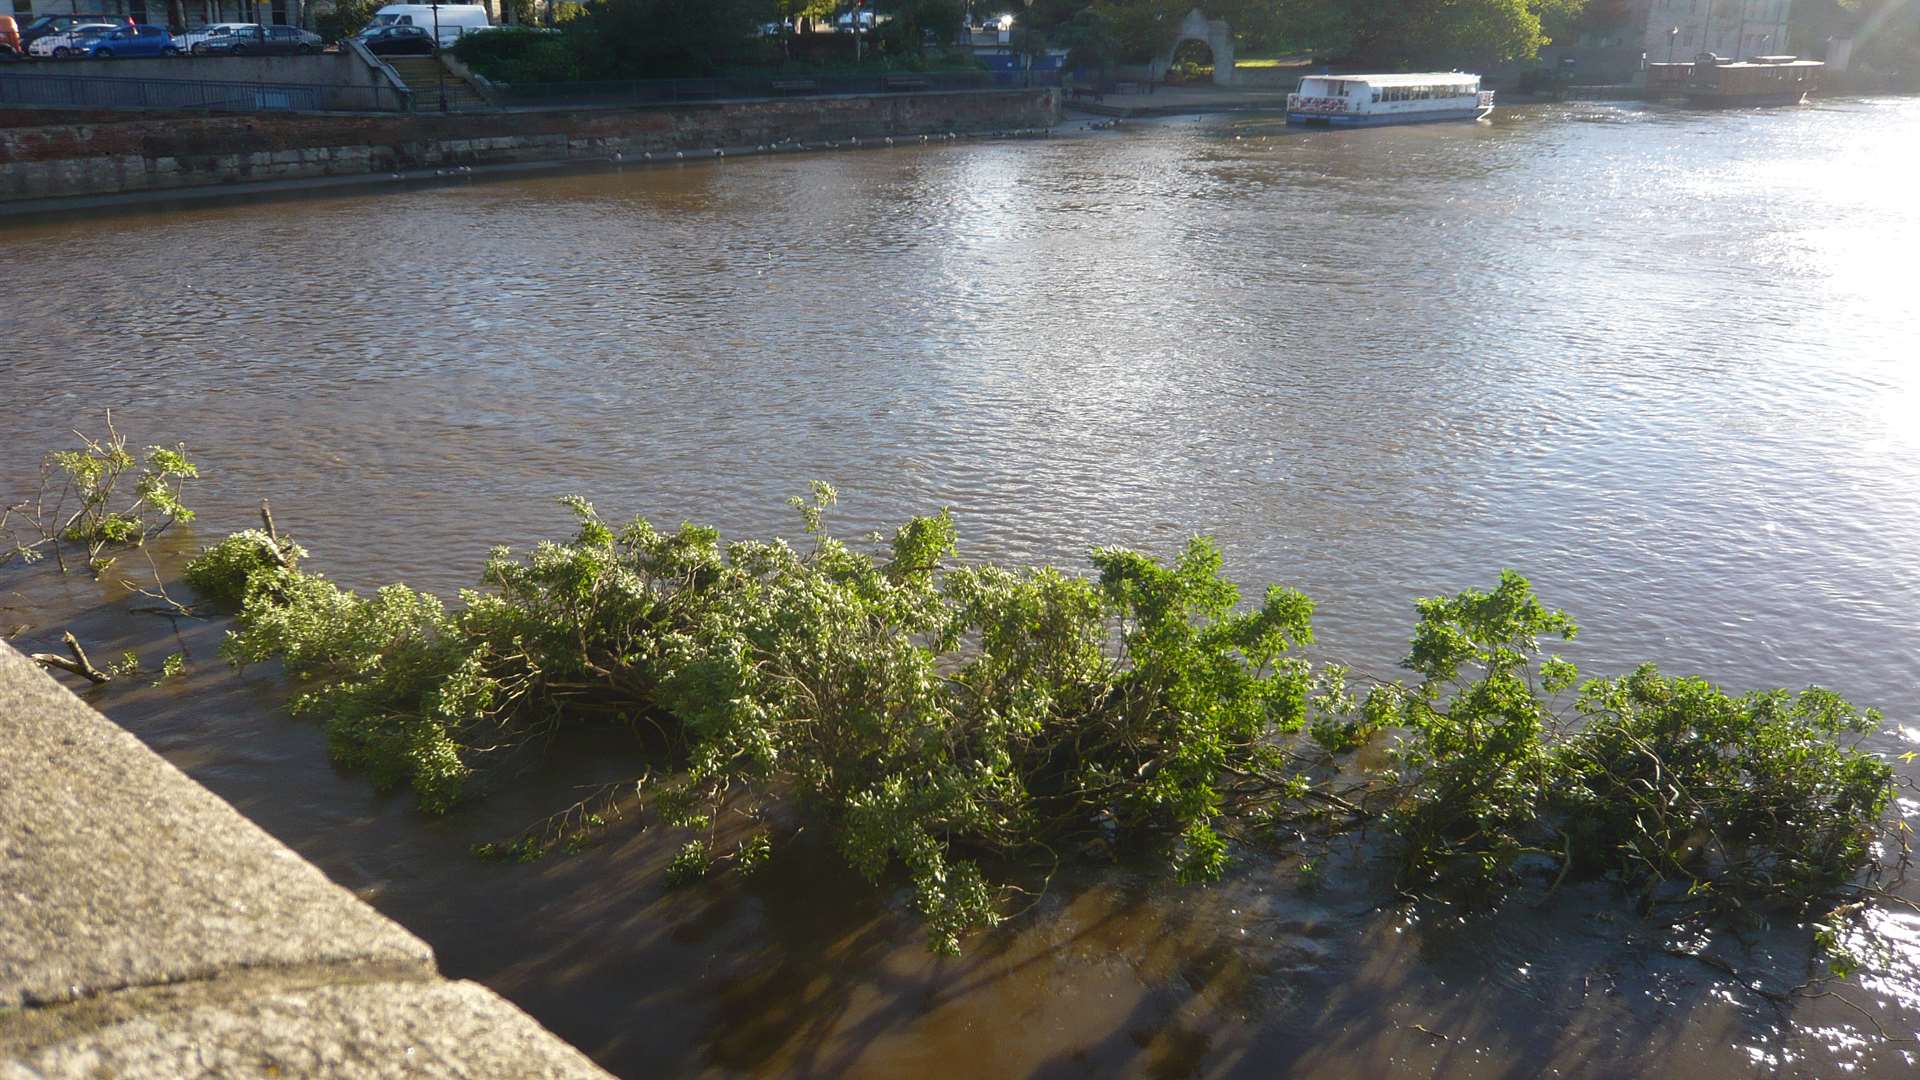 A tree in the River Medway just by the road bridge in Maidstone